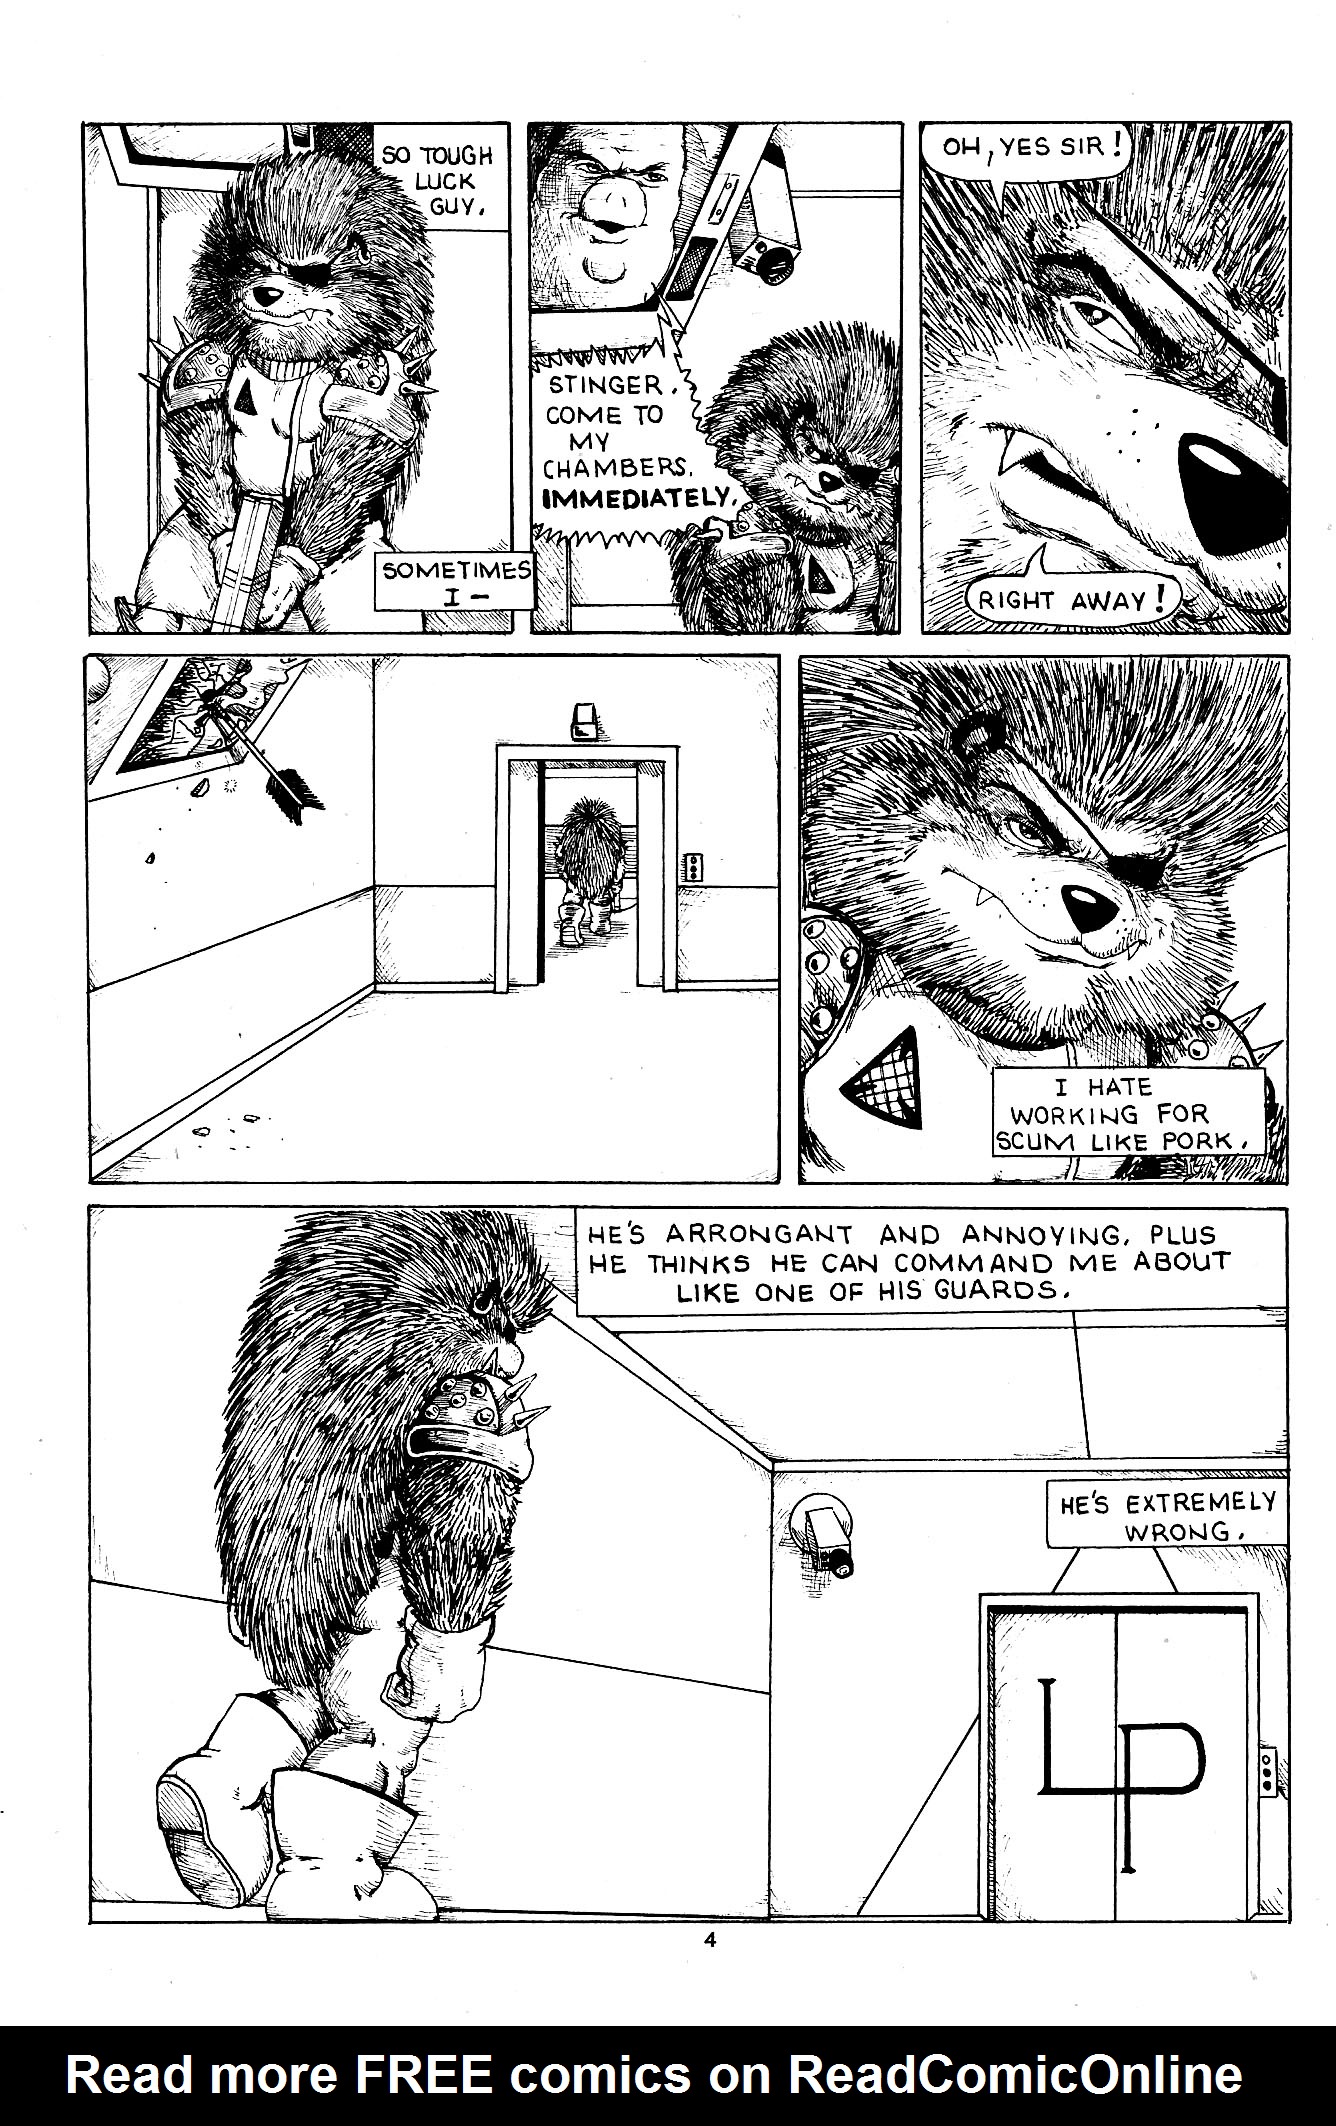 Read online Space Beaver comic -  Issue #4 - 6